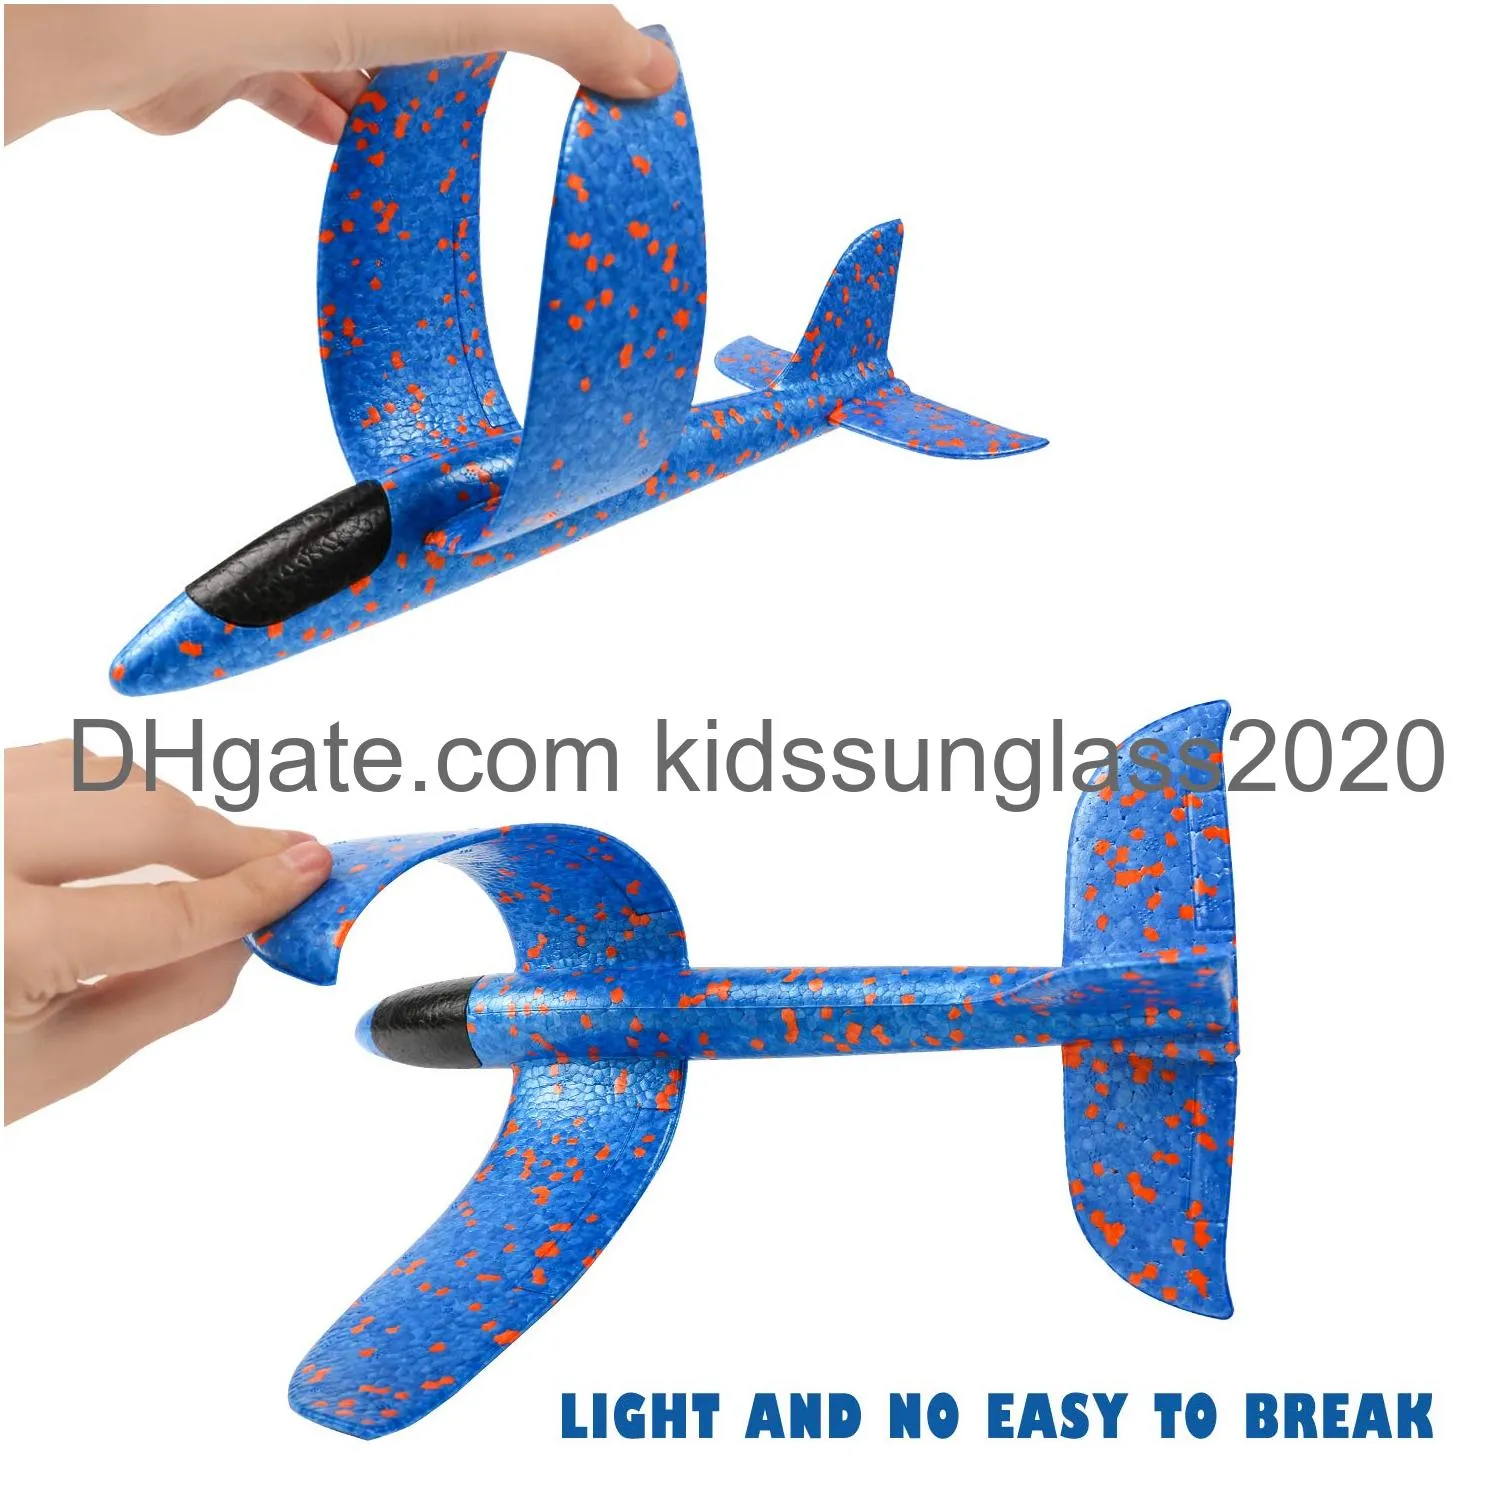 kizh throwing foam airplane toys 13.5 inches flying glider inertia plane manual circling functions flying aircraft fun best outdoor fun for kids children boys girls